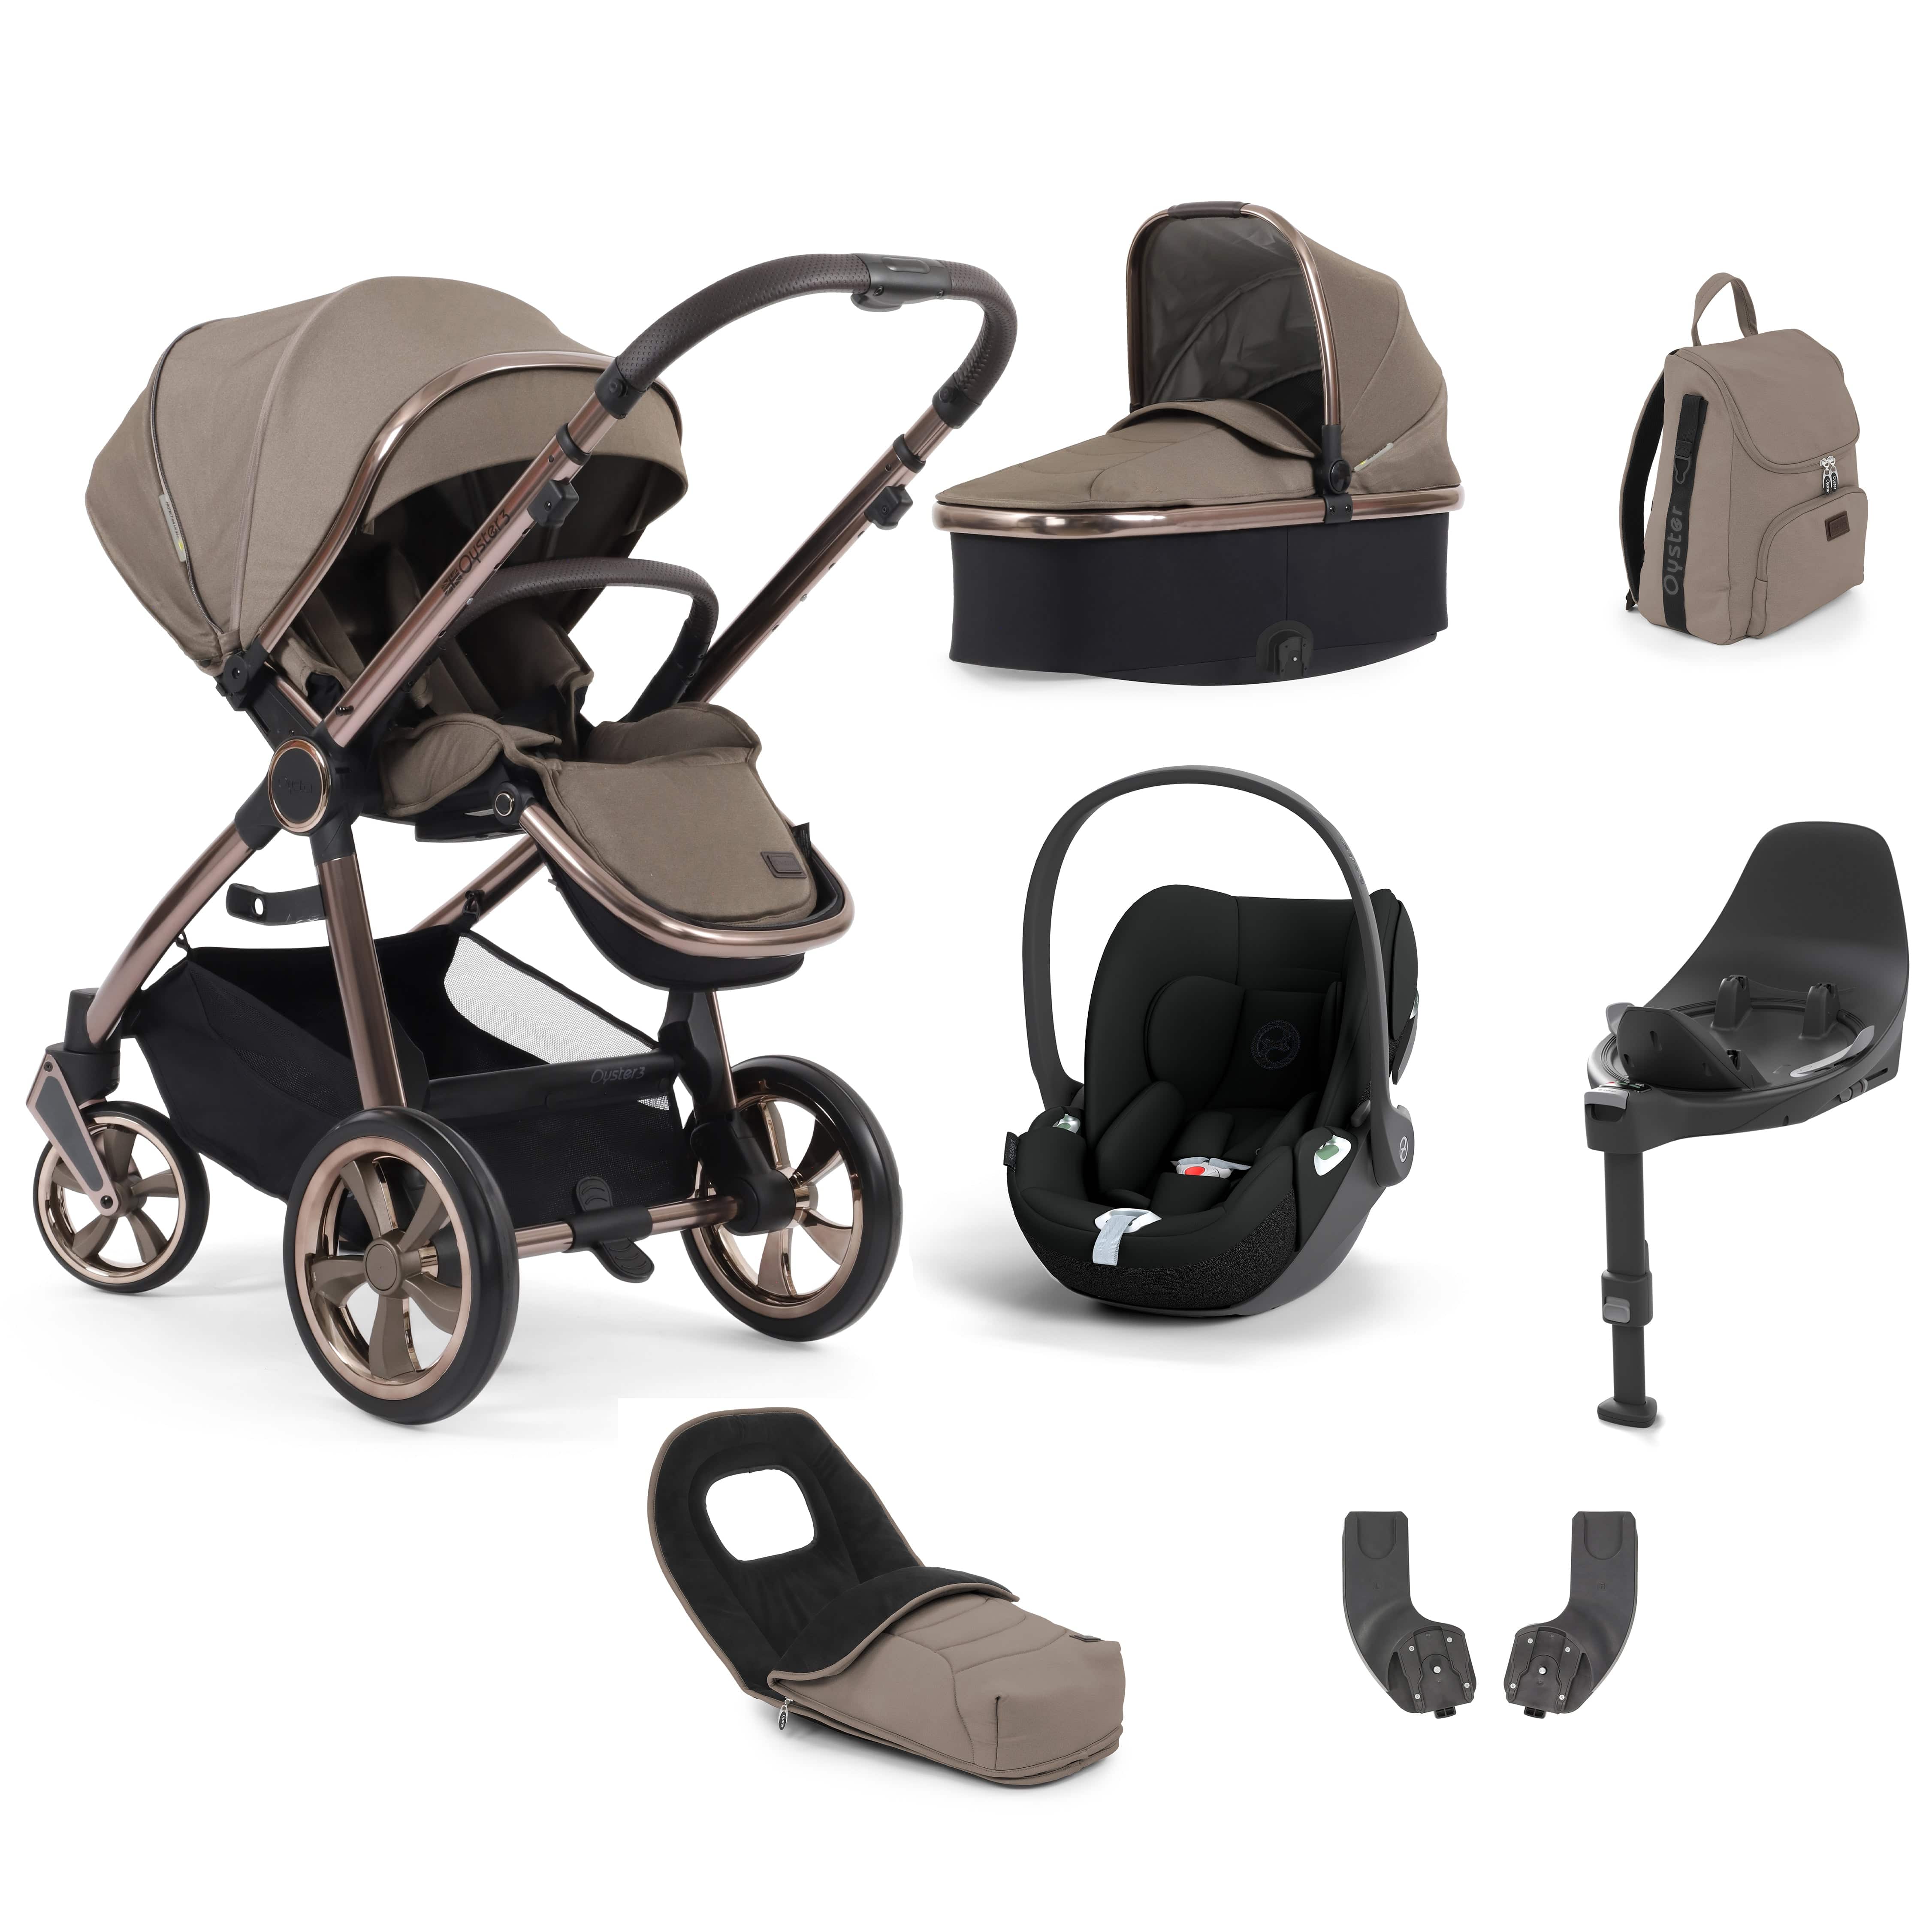 BabyStyle travel systems Babystyle Oyster 3 Luxury 7 Piece with Car Seat Bundle in Mink 14800-MNK